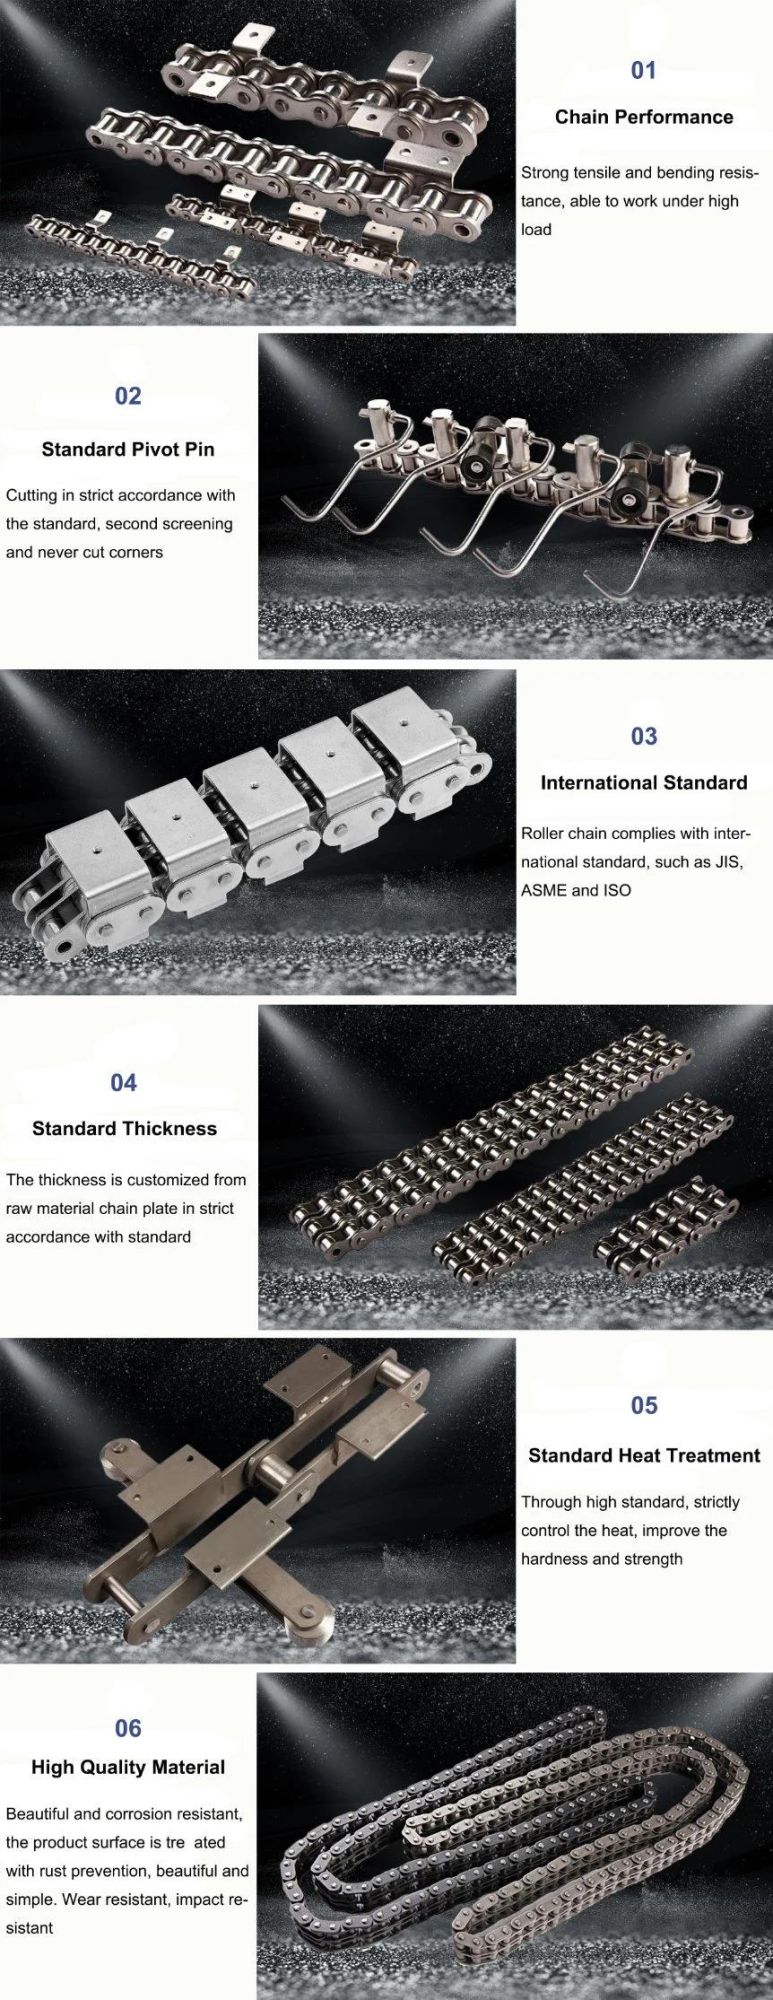 Processing Water Cabbage Cleaning Chain U-Shaped Hoof Chain 304 Stainless Steel Great Wall Mesh Belt